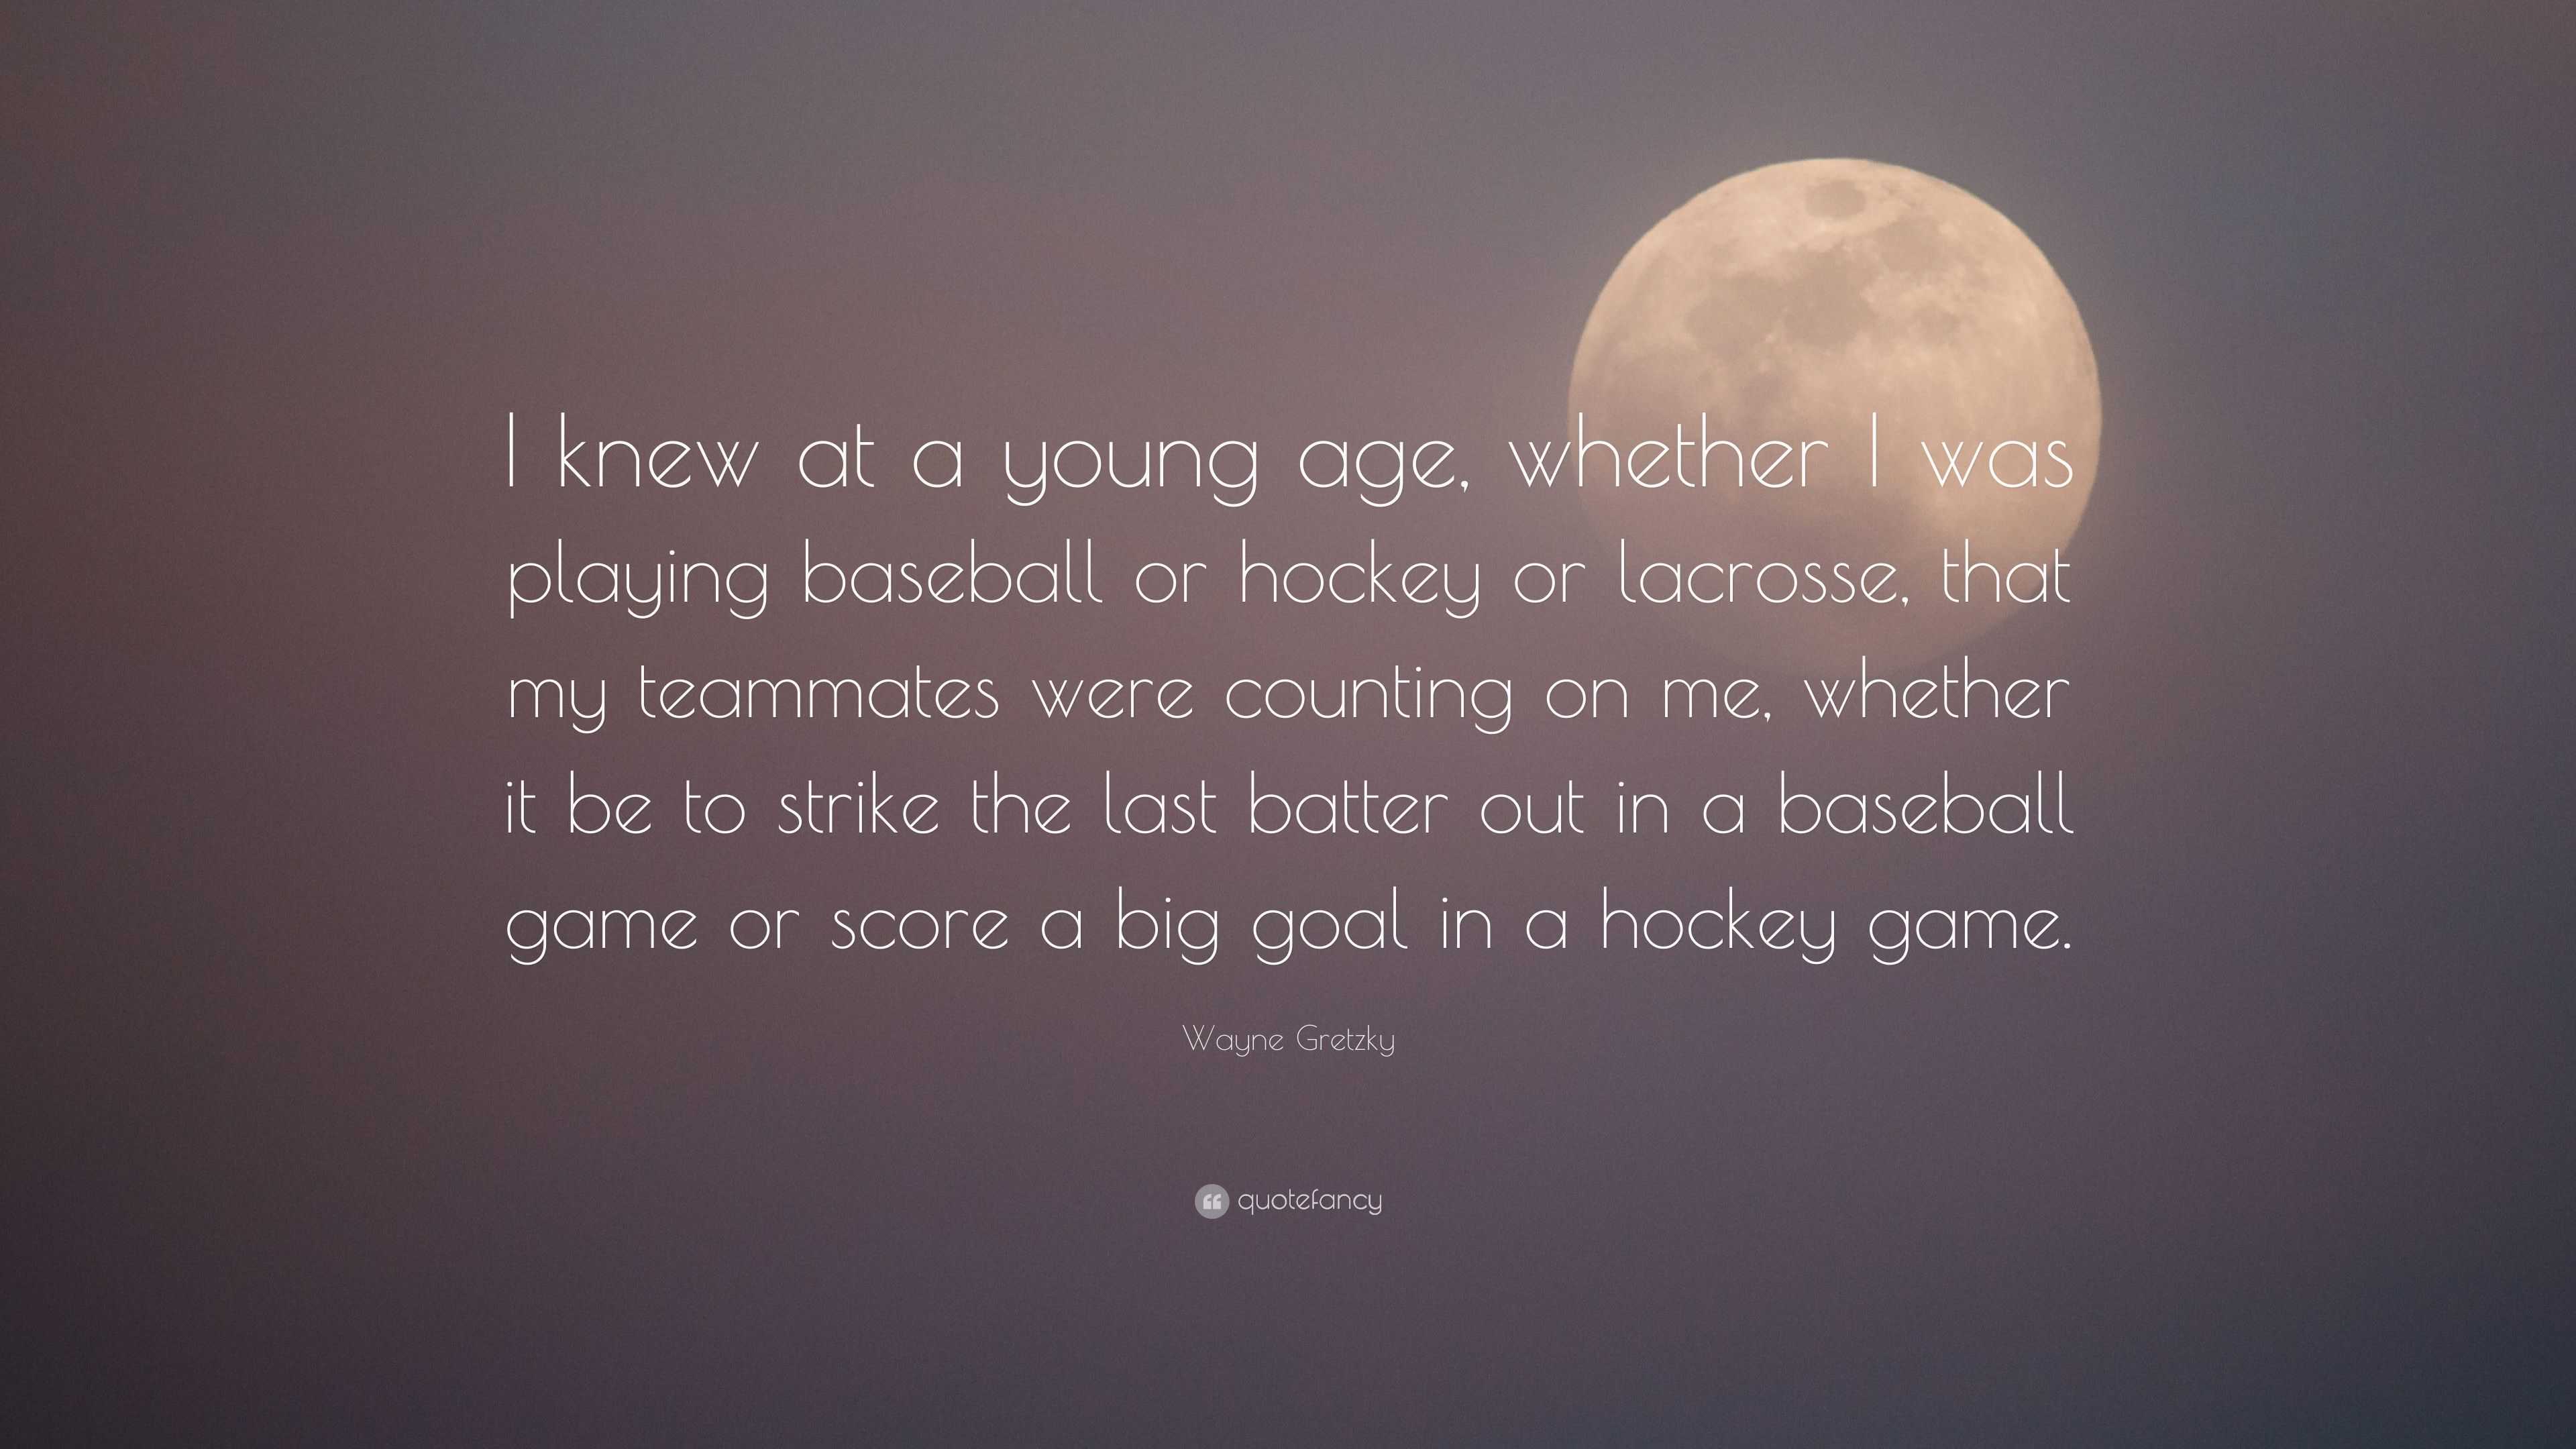 4956272 Wayne Gretzky Quote I knew at a young age whether I was playing